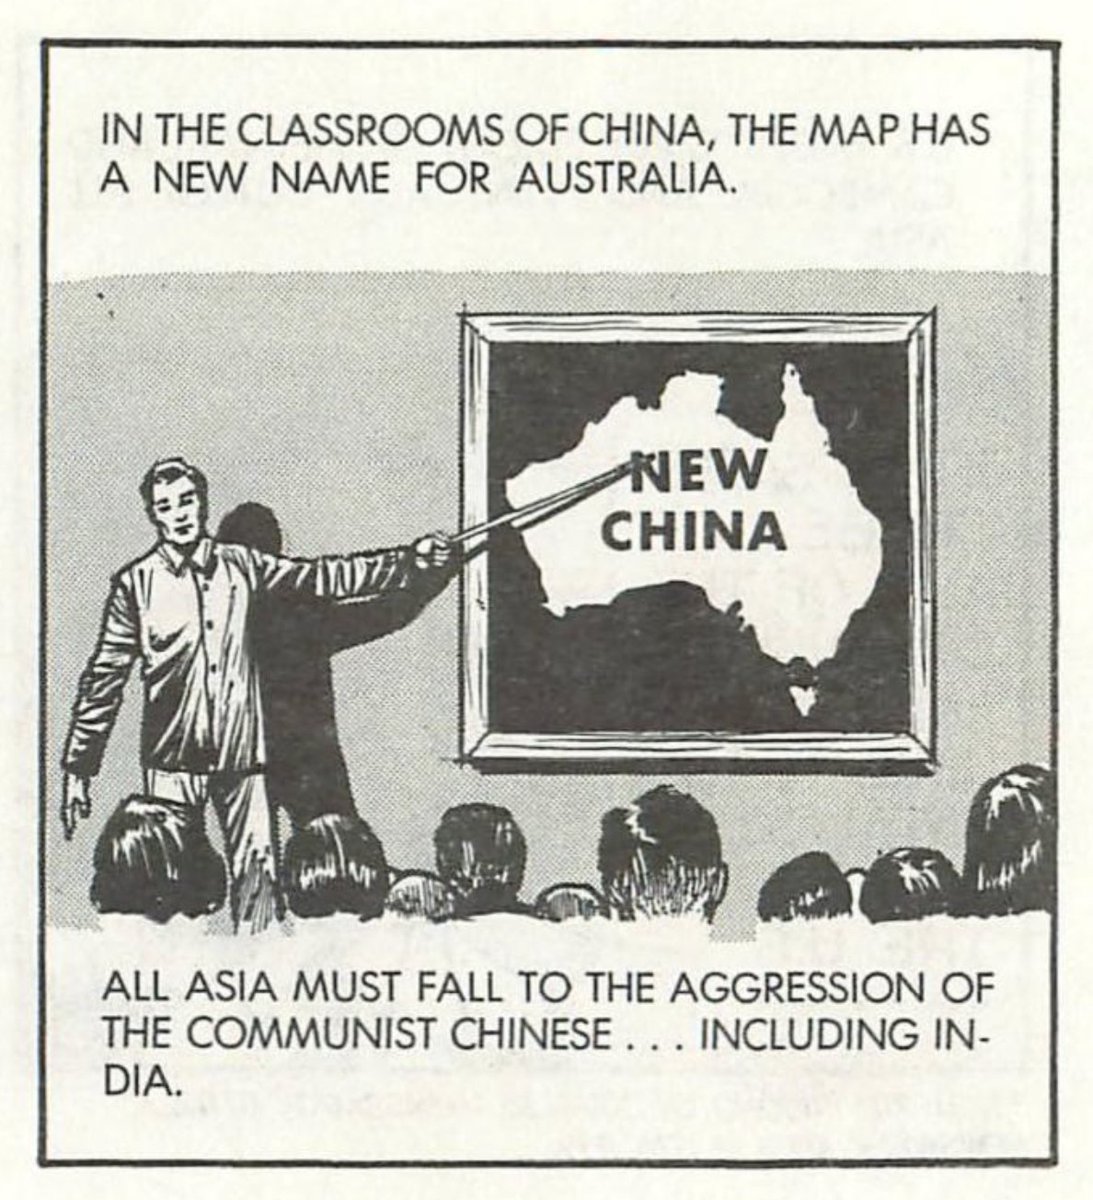 'In the classrooms of China, the map has a new name for Australia' — American anti-communist cartoon (1975) showing a Chinese teacher pointing to an Australia conquered and renamed 'New China'.